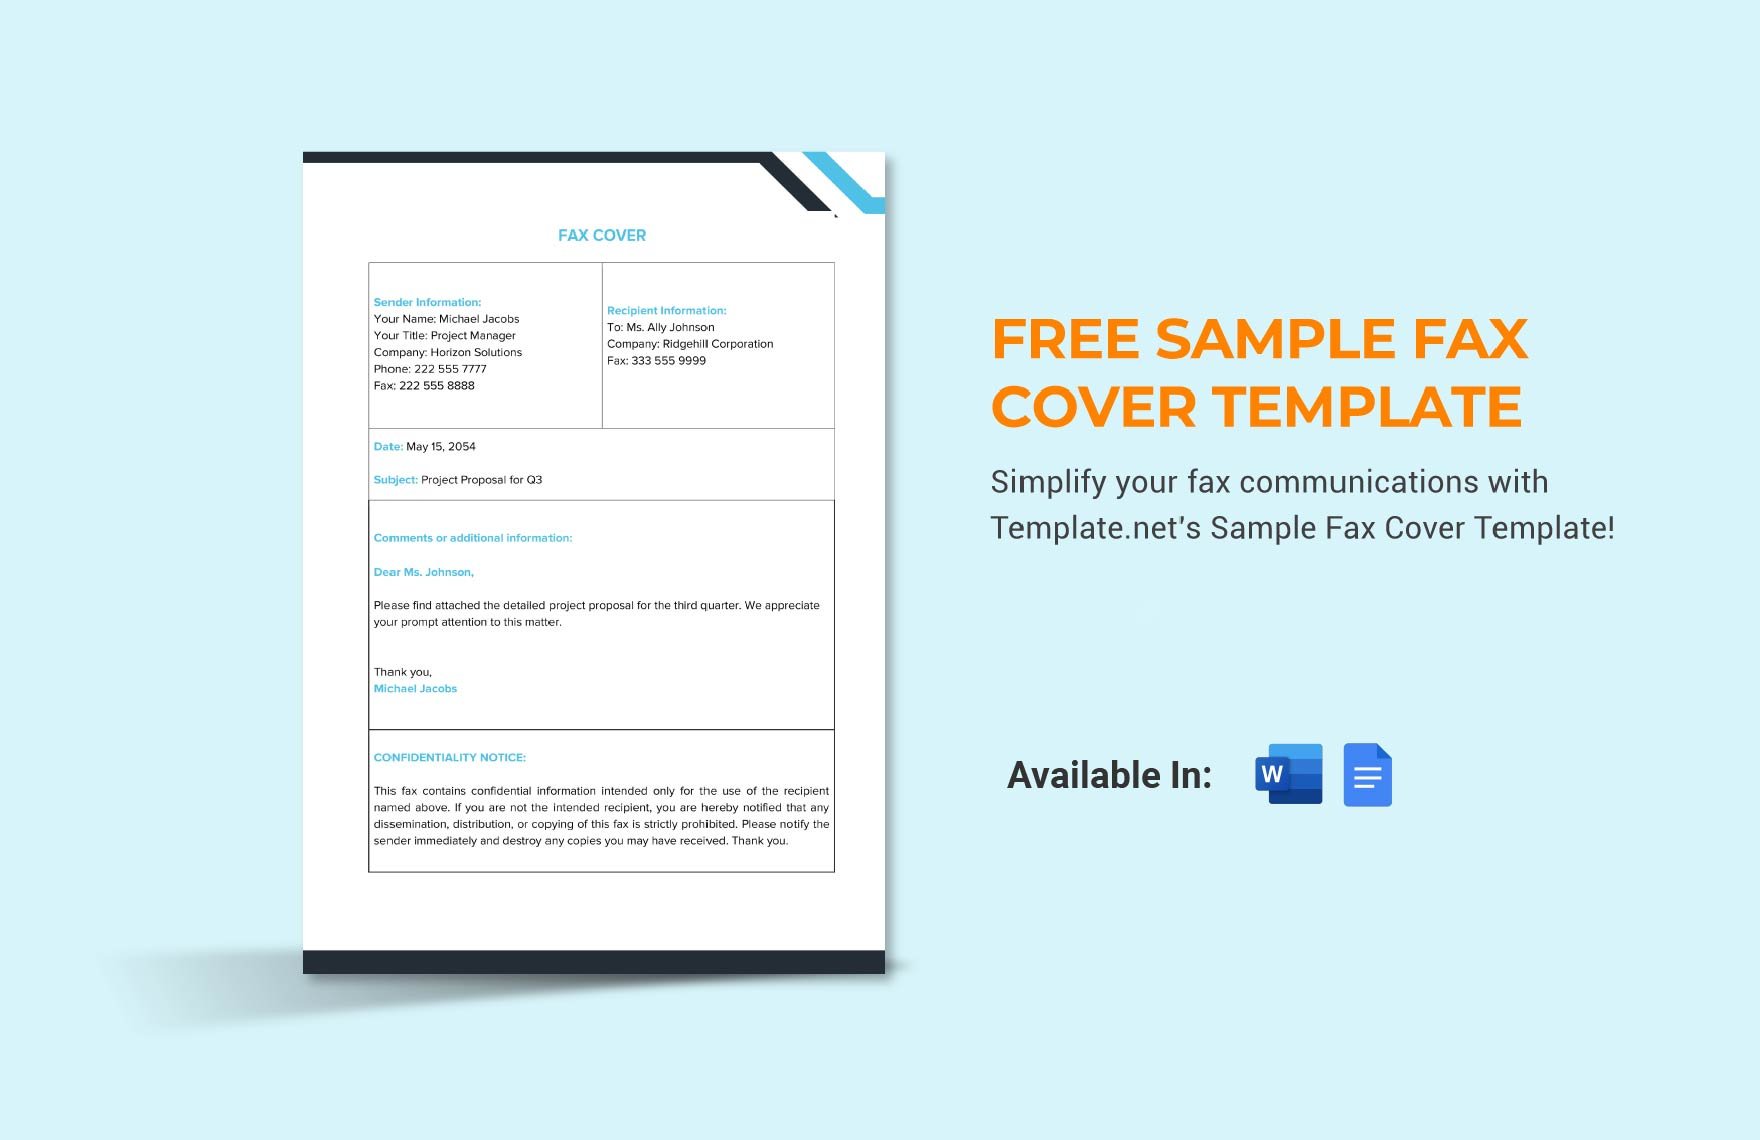 Free Sample Fax Cover Template in Word, Google Docs